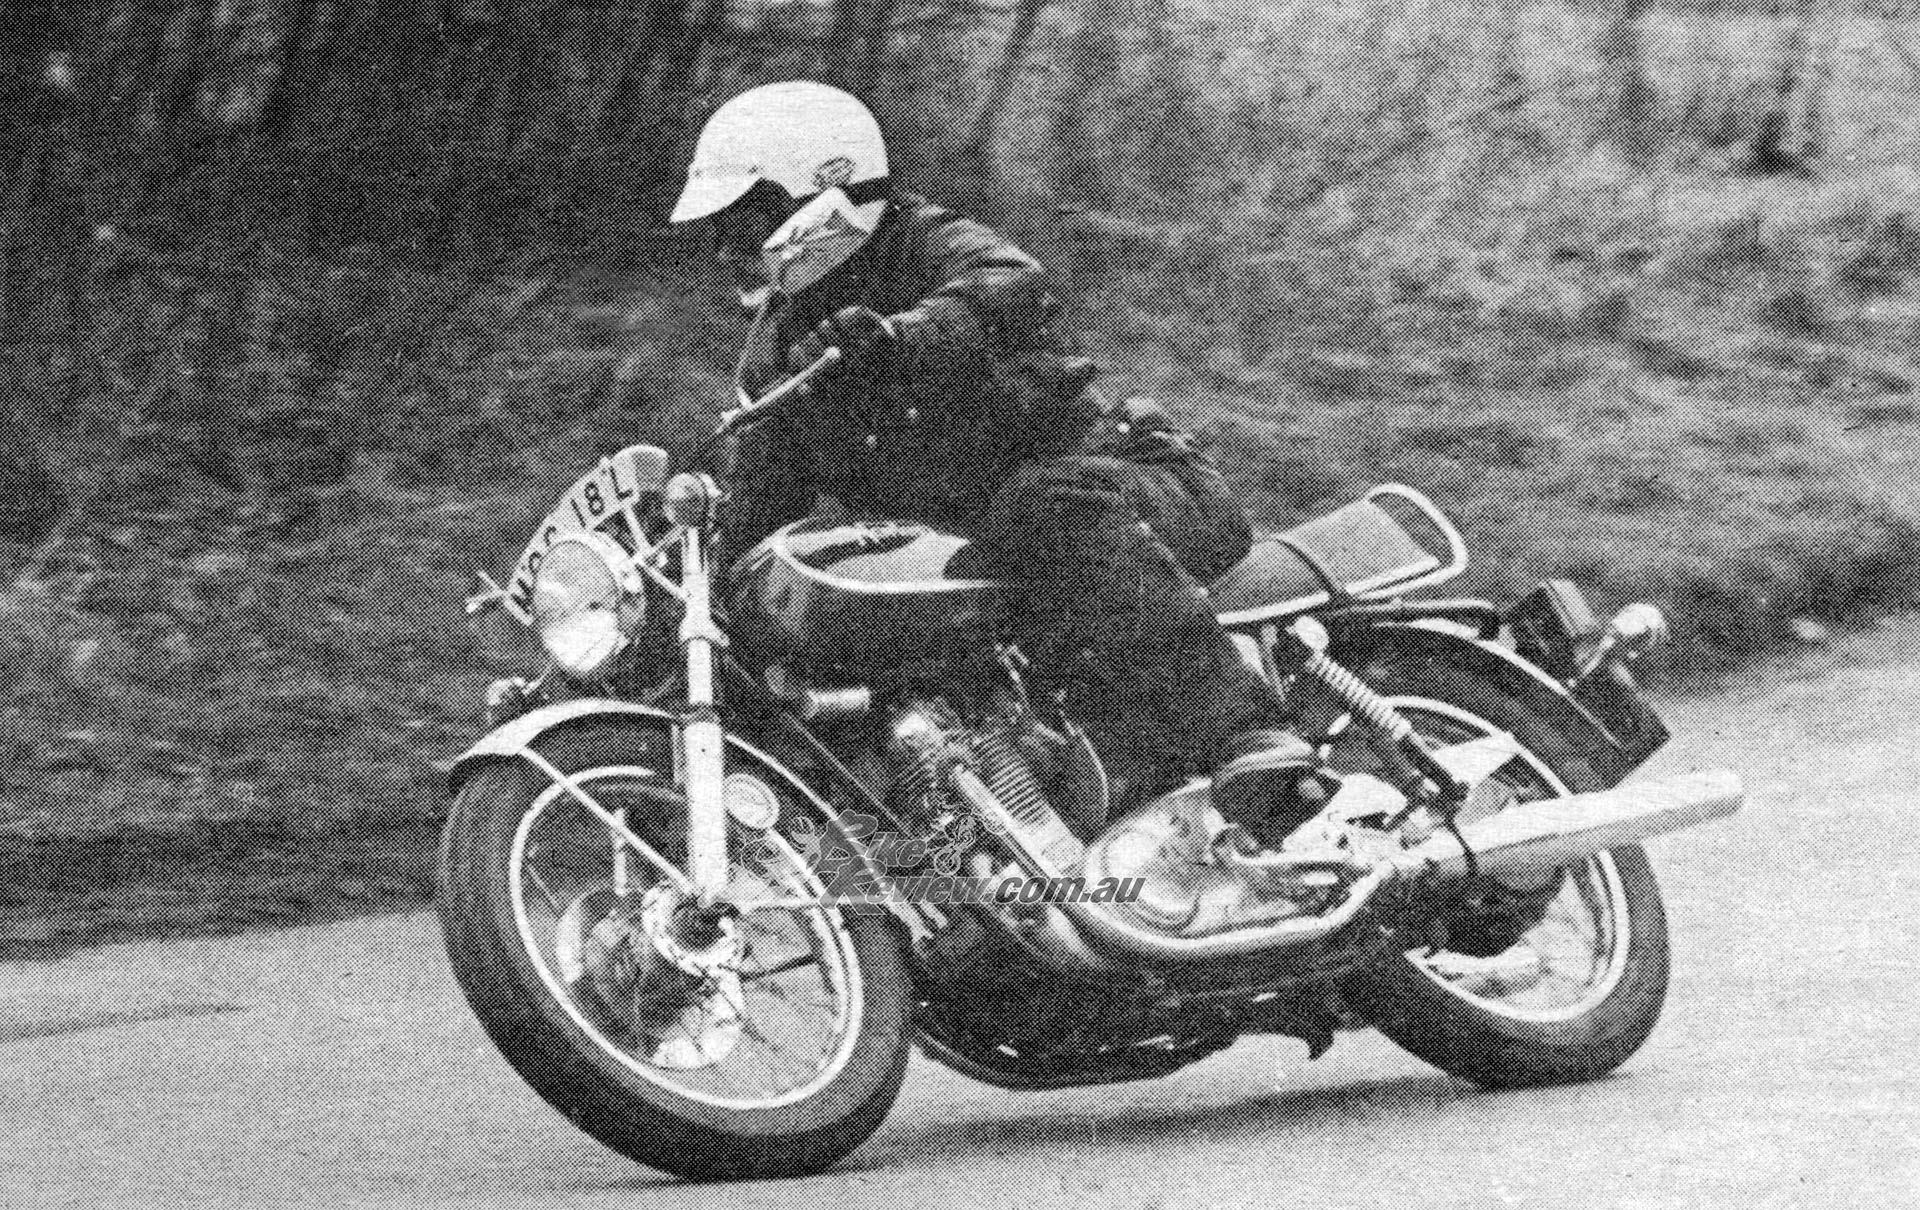 With 828cc obtained from a bigger 77mm bore, the 850 made the same 60bhp peak power but at lower revs, 6,200rpm. And on the same gearing as the 750 it could rev out better, reaching 120.7mph flat out, making it the fastest Norton ever tested by Motor Cycle.